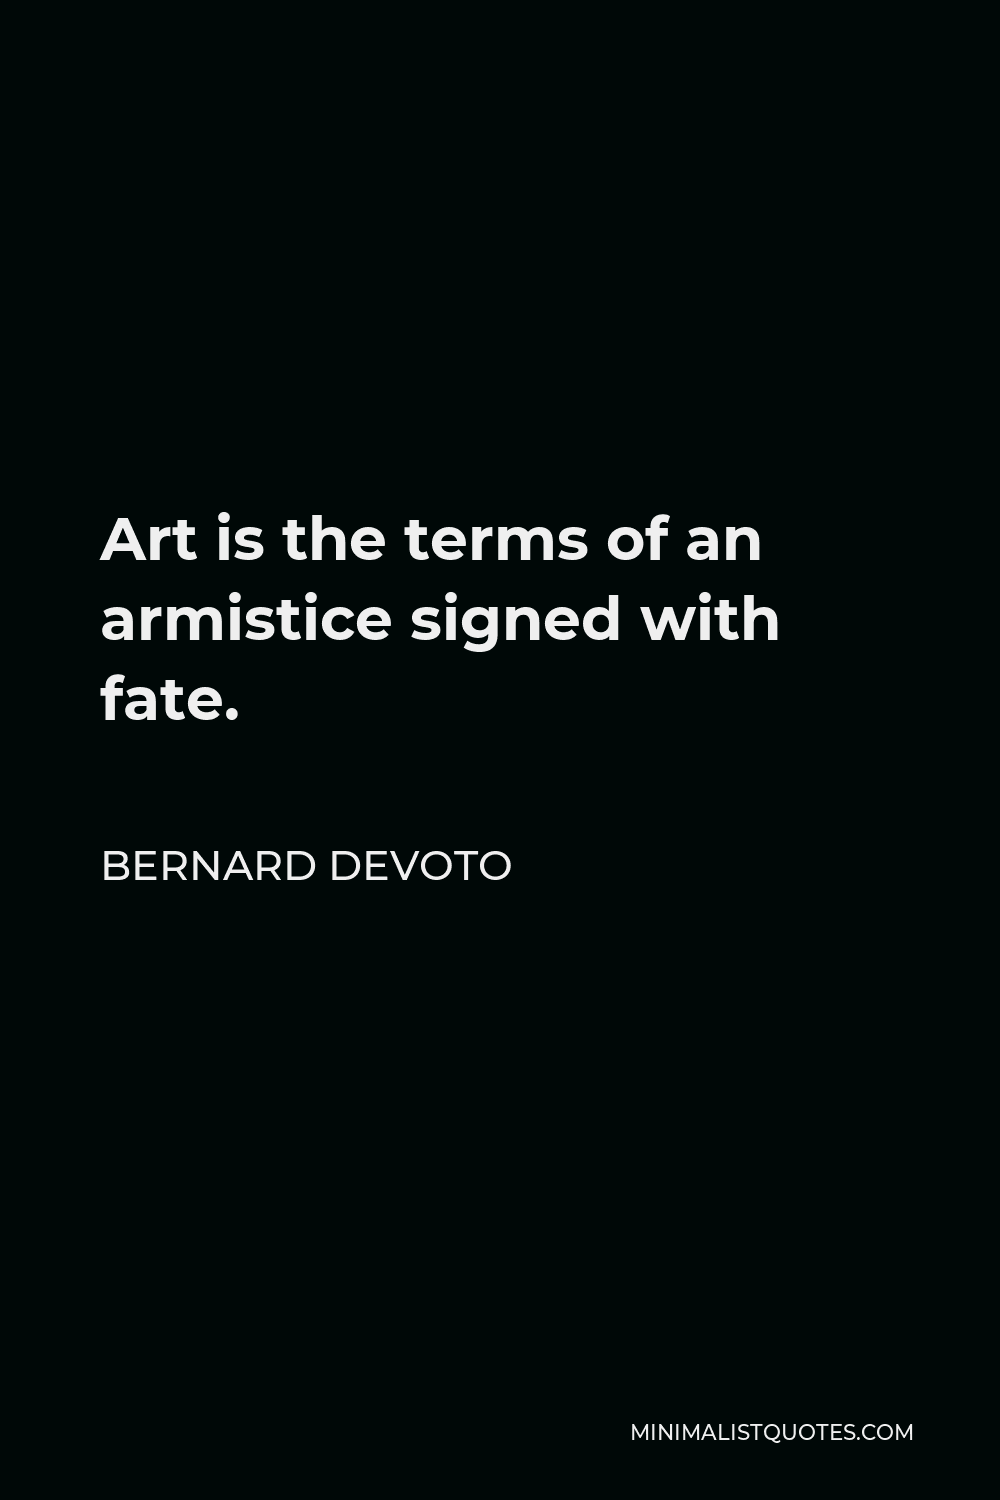 Bernard DeVoto Quote - Art is the terms of an armistice signed with fate.